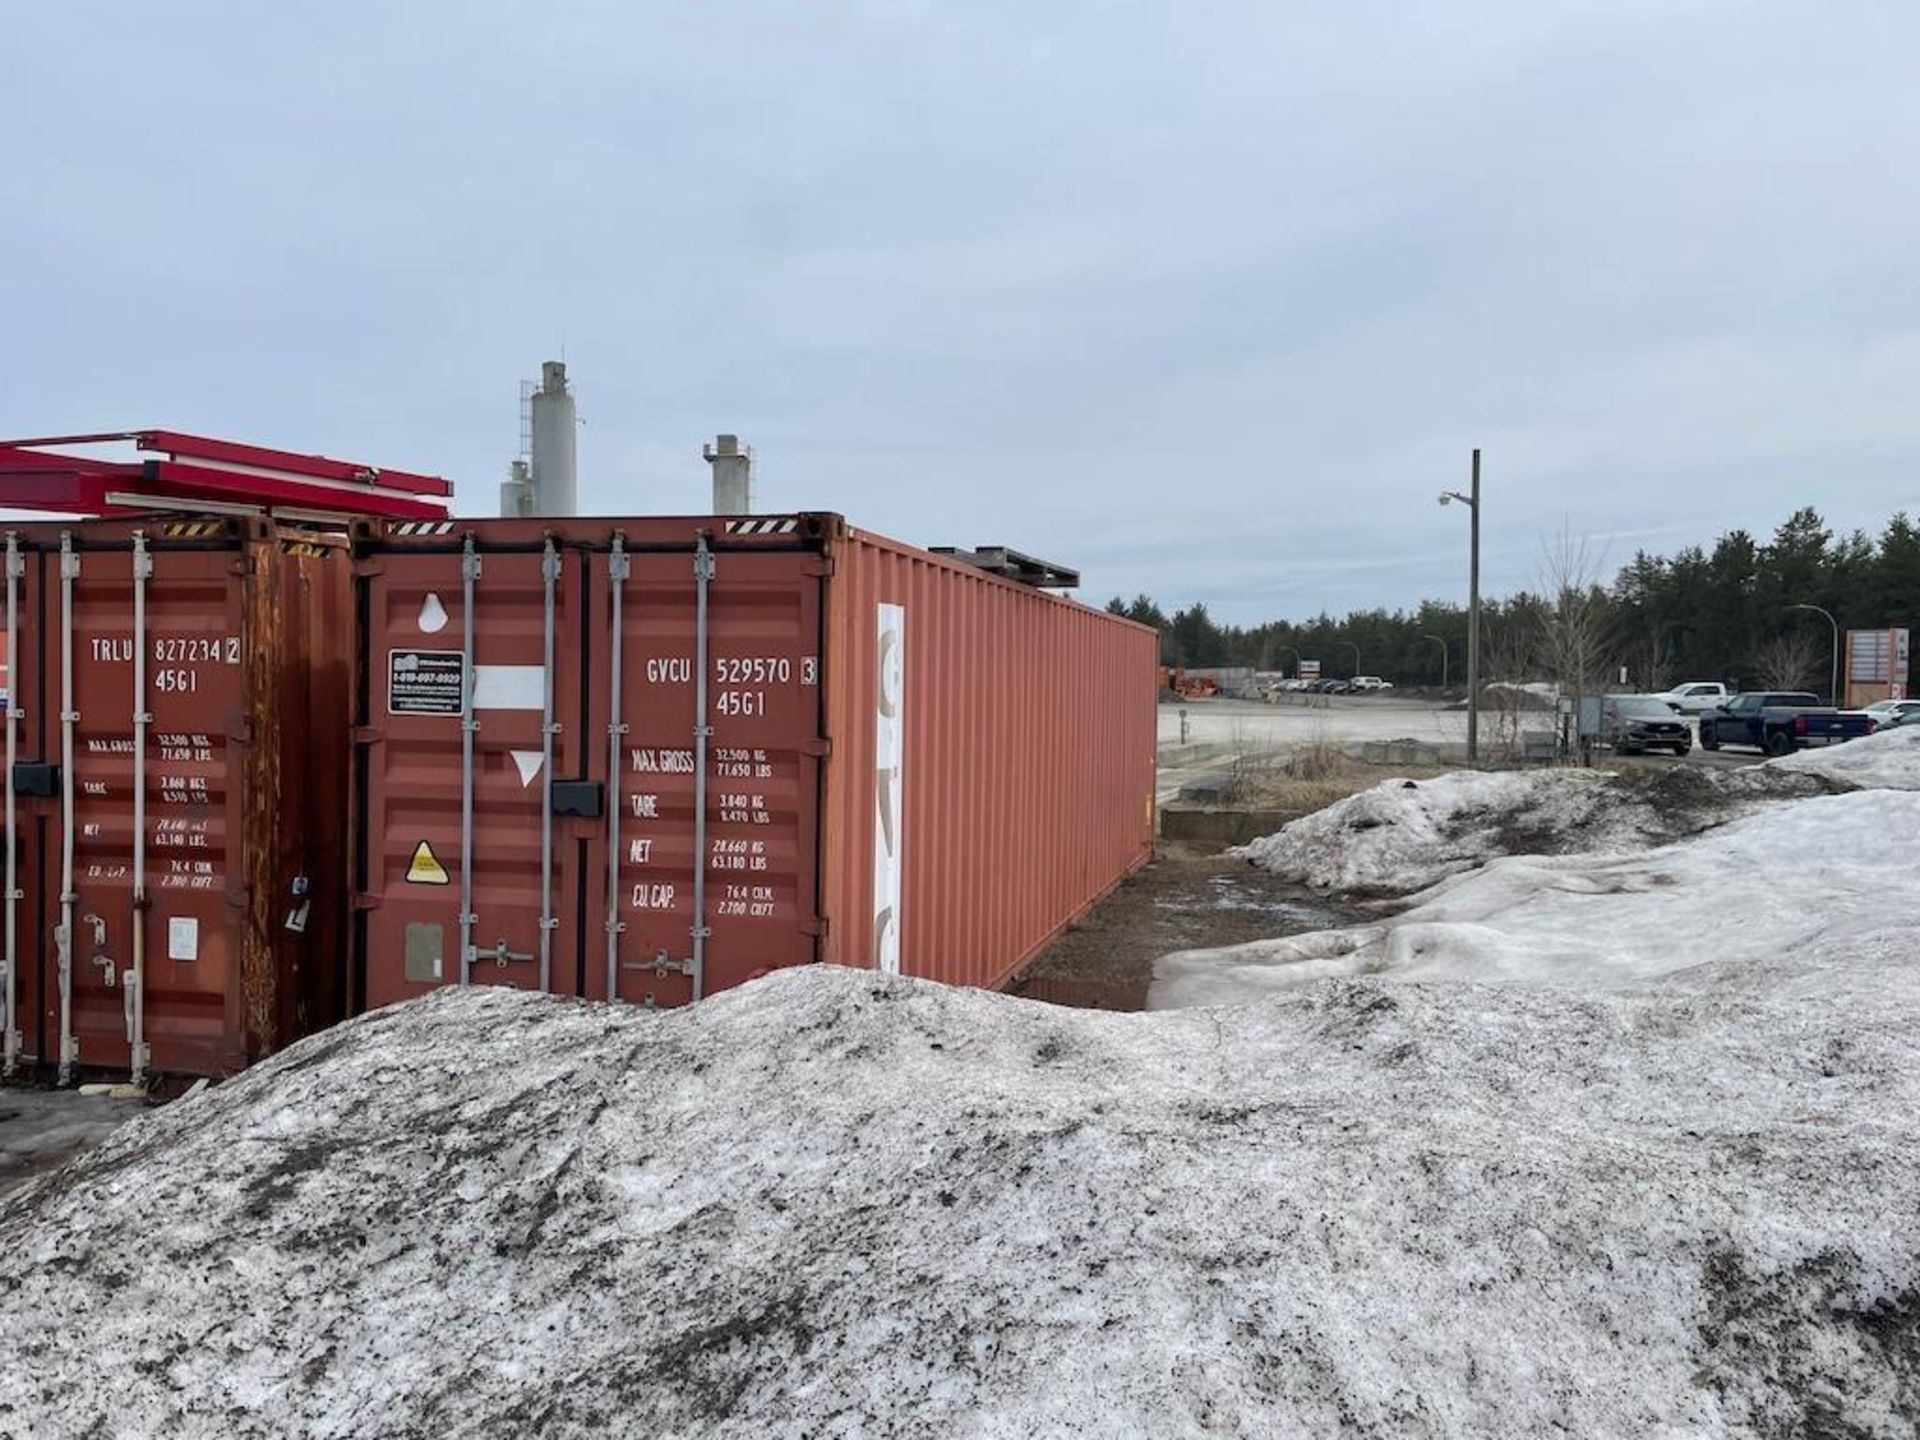 40 FT SEA CONTAINER, EXCLUDING CONTENTS, DELAYED PICK UP UNTIL MAY 13 [1] [TROIS RIVIERES] *PLEASE N - Image 2 of 4